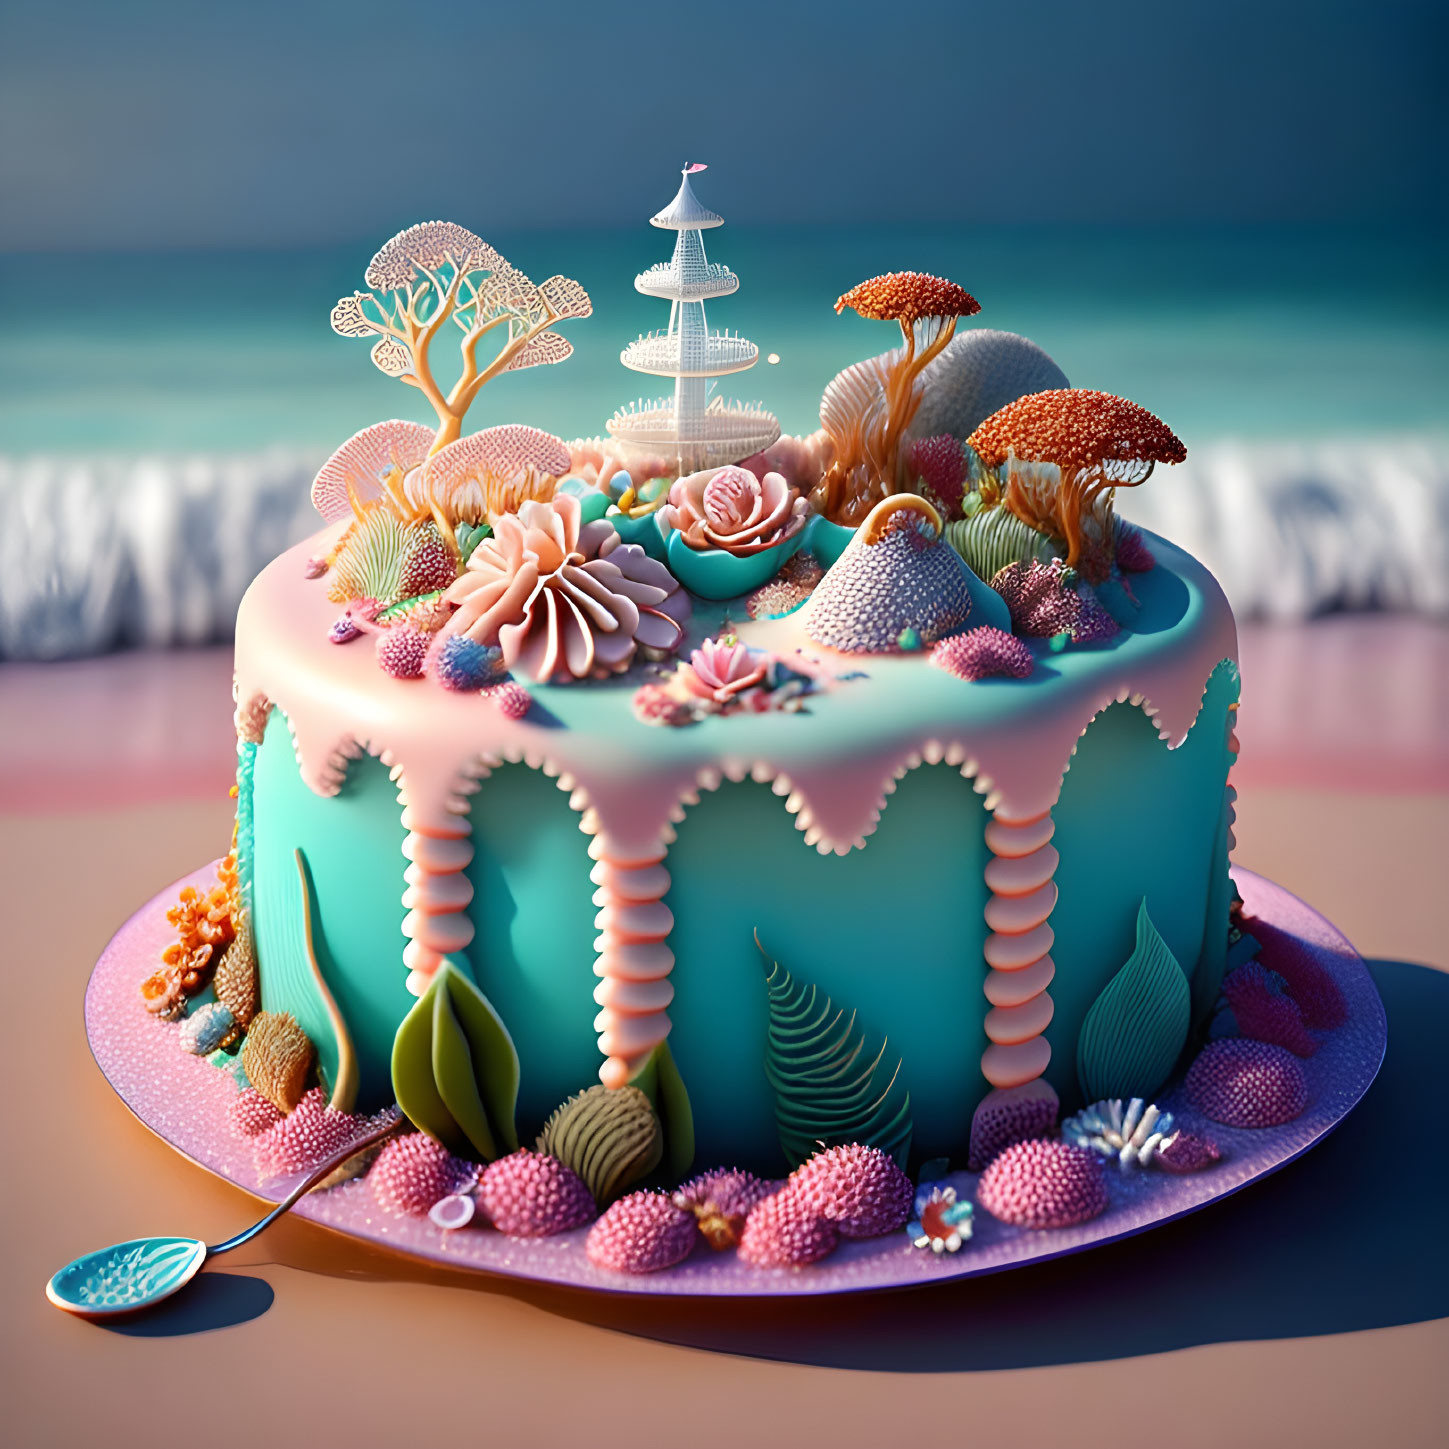 Ocean-themed cake with coral, seashells, and fondant pagoda on beach backdrop